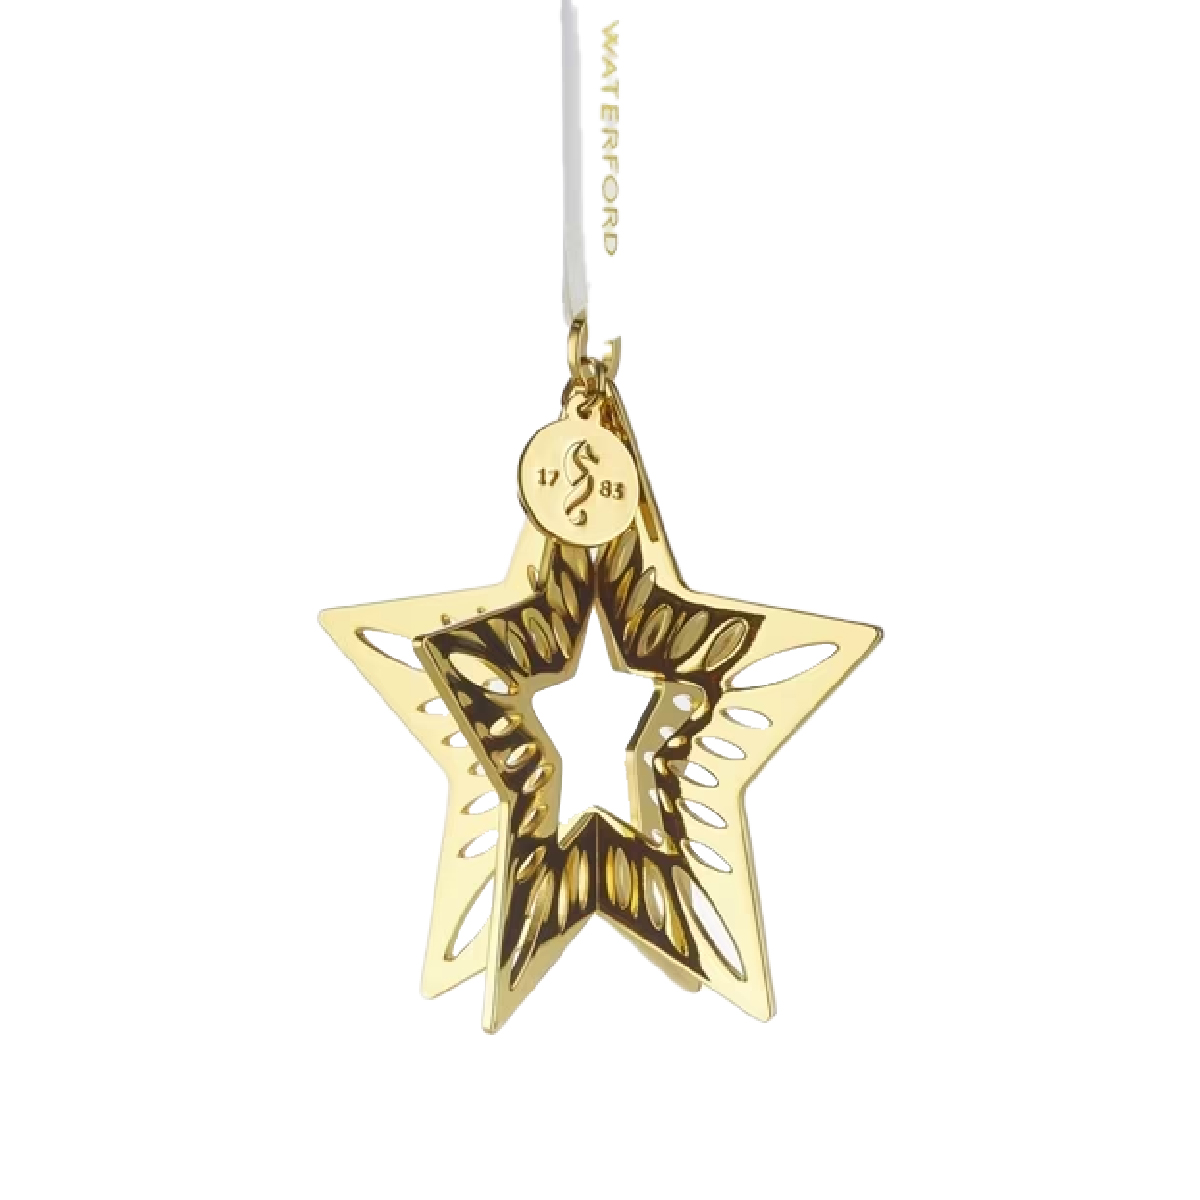 Waterford - Gold 3D Star Ornament